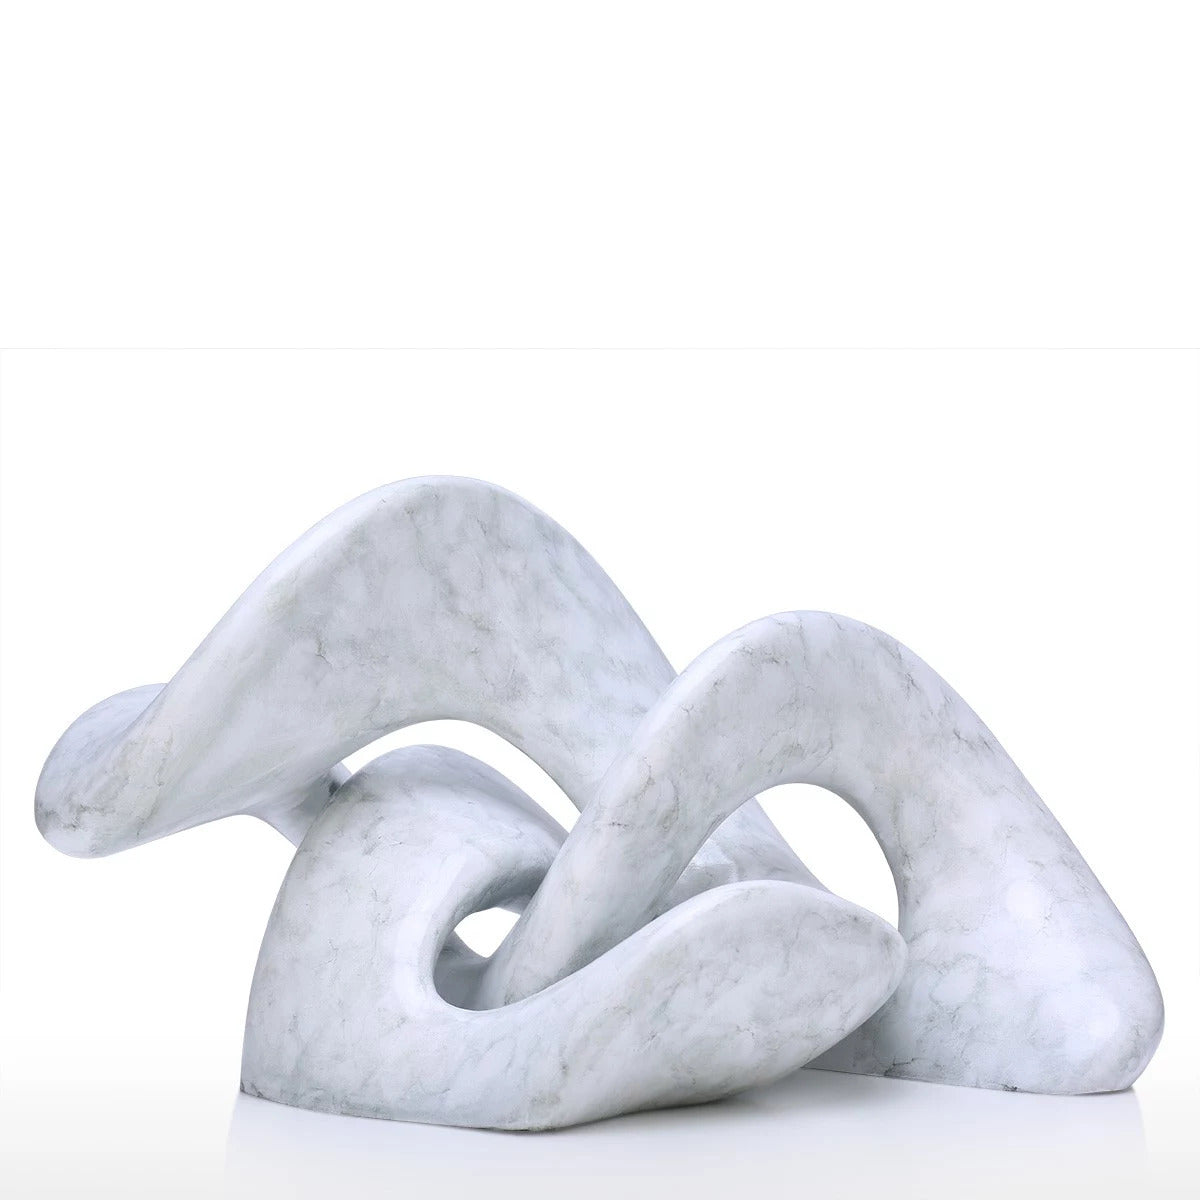 Abstract Geometric White Sculpture For Sweet Accent Home Decor